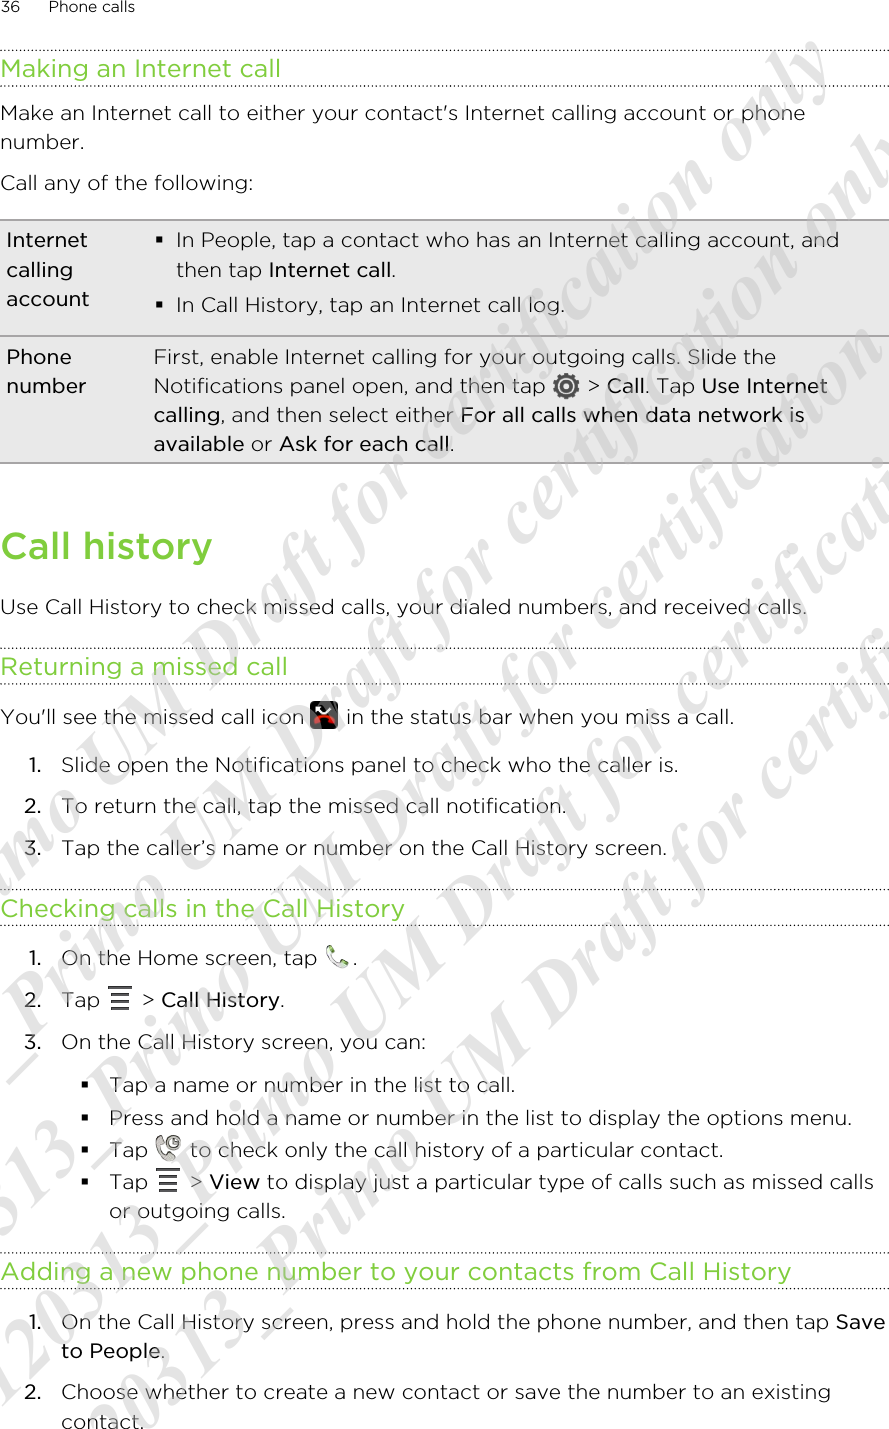 Making an Internet callMake an Internet call to either your contact&apos;s Internet calling account or phonenumber.Call any of the following:Internetcallingaccount§In People, tap a contact who has an Internet calling account, andthen tap Internet call.§In Call History, tap an Internet call log.PhonenumberFirst, enable Internet calling for your outgoing calls. Slide theNotifications panel open, and then tap   &gt; Call. Tap Use Internetcalling, and then select either For all calls when data network isavailable or Ask for each call.Call historyUse Call History to check missed calls, your dialed numbers, and received calls.Returning a missed callYou&apos;ll see the missed call icon   in the status bar when you miss a call.1. Slide open the Notifications panel to check who the caller is.2. To return the call, tap the missed call notification.3. Tap the caller’s name or number on the Call History screen.Checking calls in the Call History1. On the Home screen, tap  .2. Tap   &gt; Call History.3. On the Call History screen, you can:§Tap a name or number in the list to call.§Press and hold a name or number in the list to display the options menu.§Tap   to check only the call history of a particular contact.§Tap   &gt; View to display just a particular type of calls such as missed callsor outgoing calls.Adding a new phone number to your contacts from Call History1. On the Call History screen, press and hold the phone number, and then tap Saveto People.2. Choose whether to create a new contact or save the number to an existingcontact.36 Phone calls20120313_Primo UM Draft for certification only 20120313_Primo UM Draft for certification only 20120313_Primo UM Draft for certification only 20120313_Primo UM Draft for certification only 20120313_Primo UM Draft for certification only